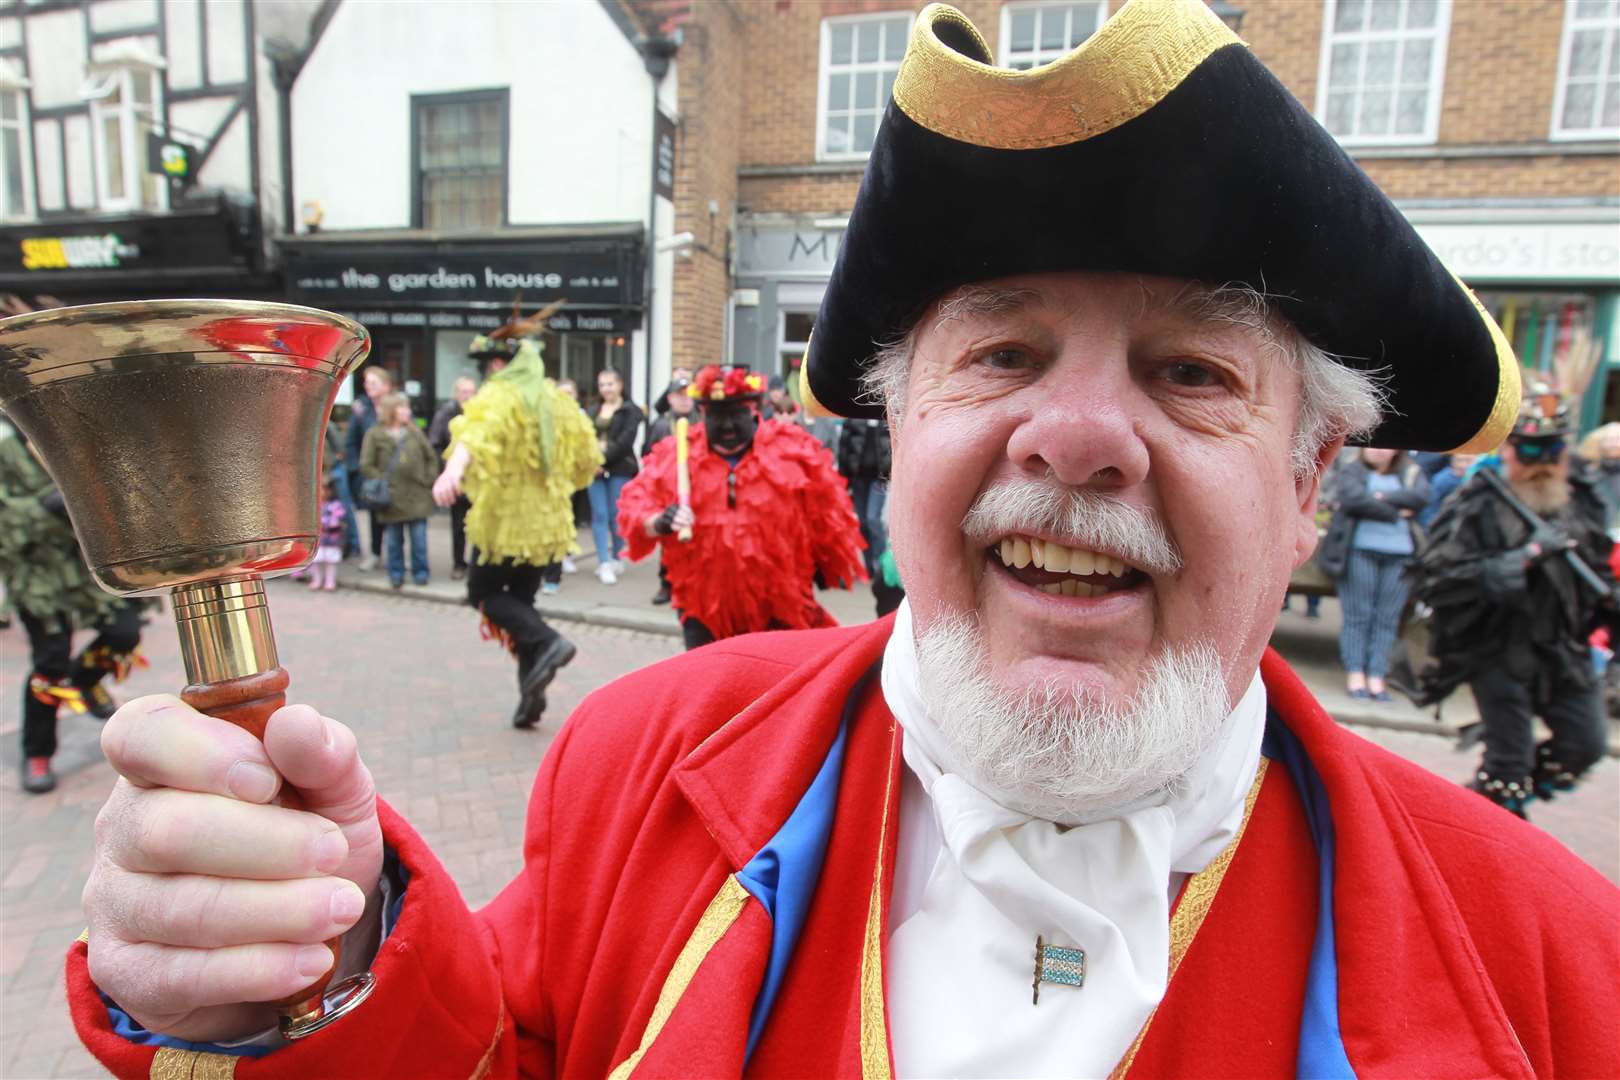 Mike Billingham, Town Crier from Gillingham, led the Sweeps procession in 2019. Picture: John Westhrop